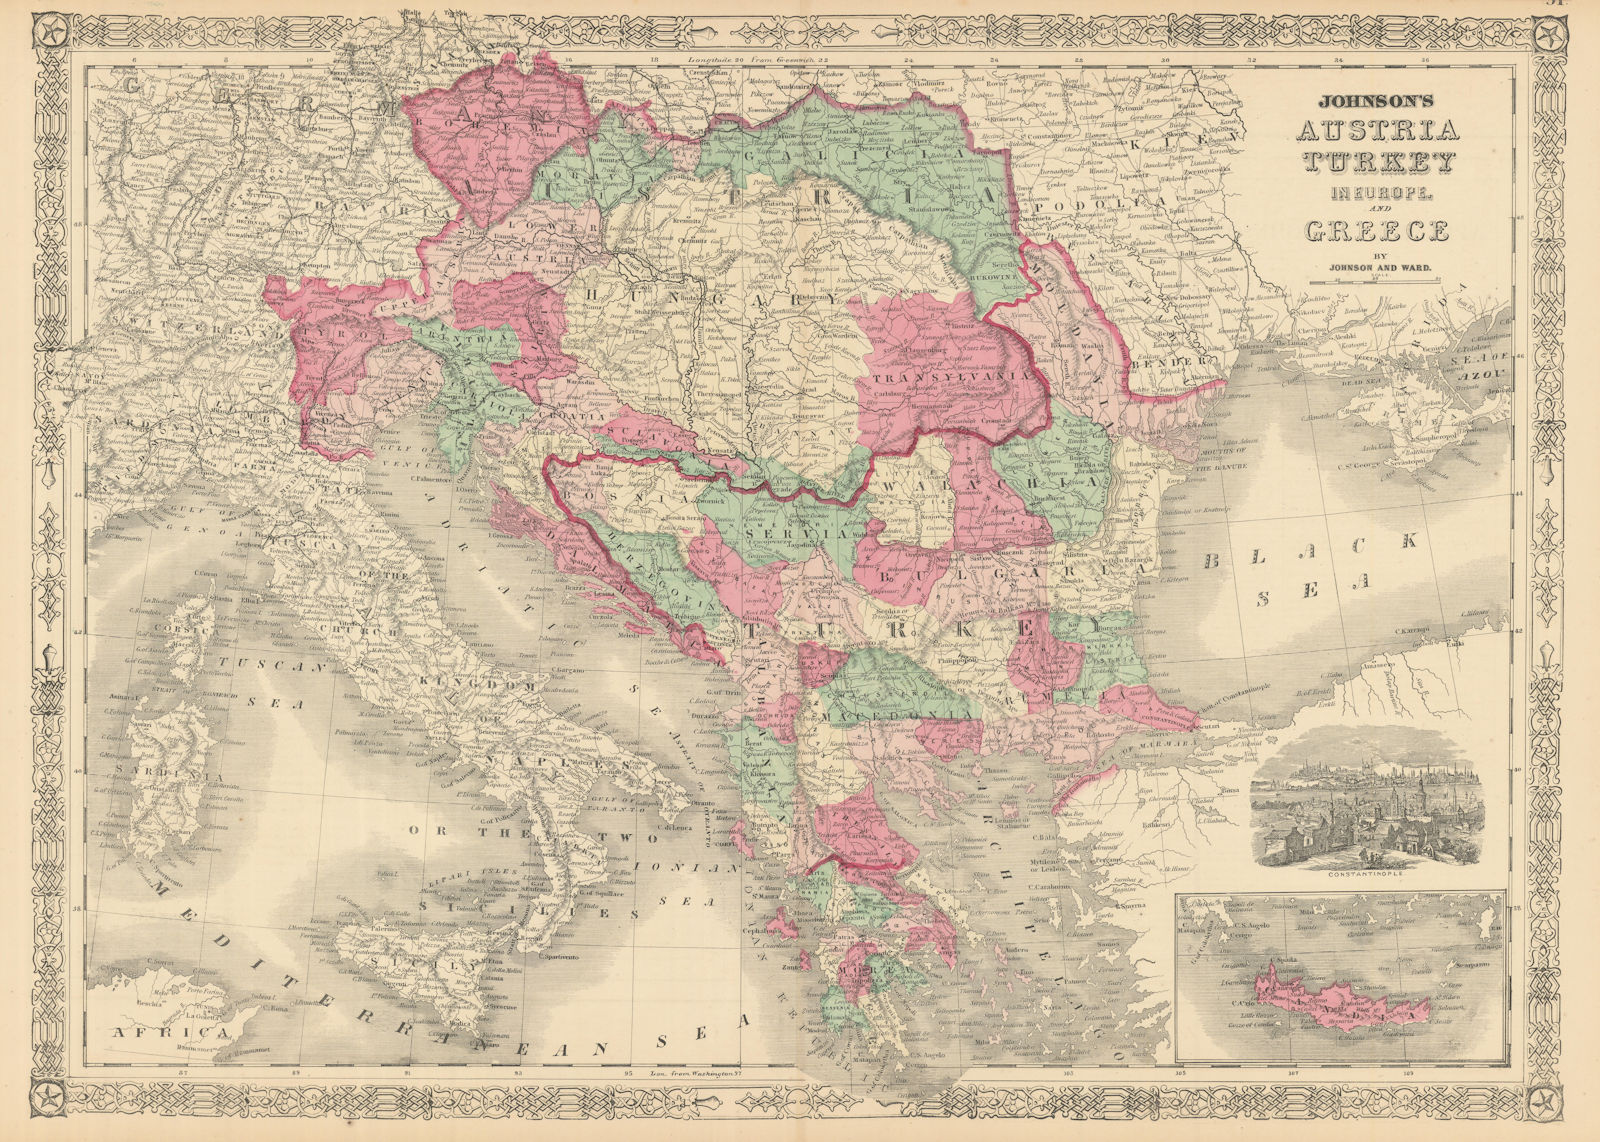 Associate Product Johnson's Austria, Turkey in Europe and Greece. Balkans Venice 1866 old map